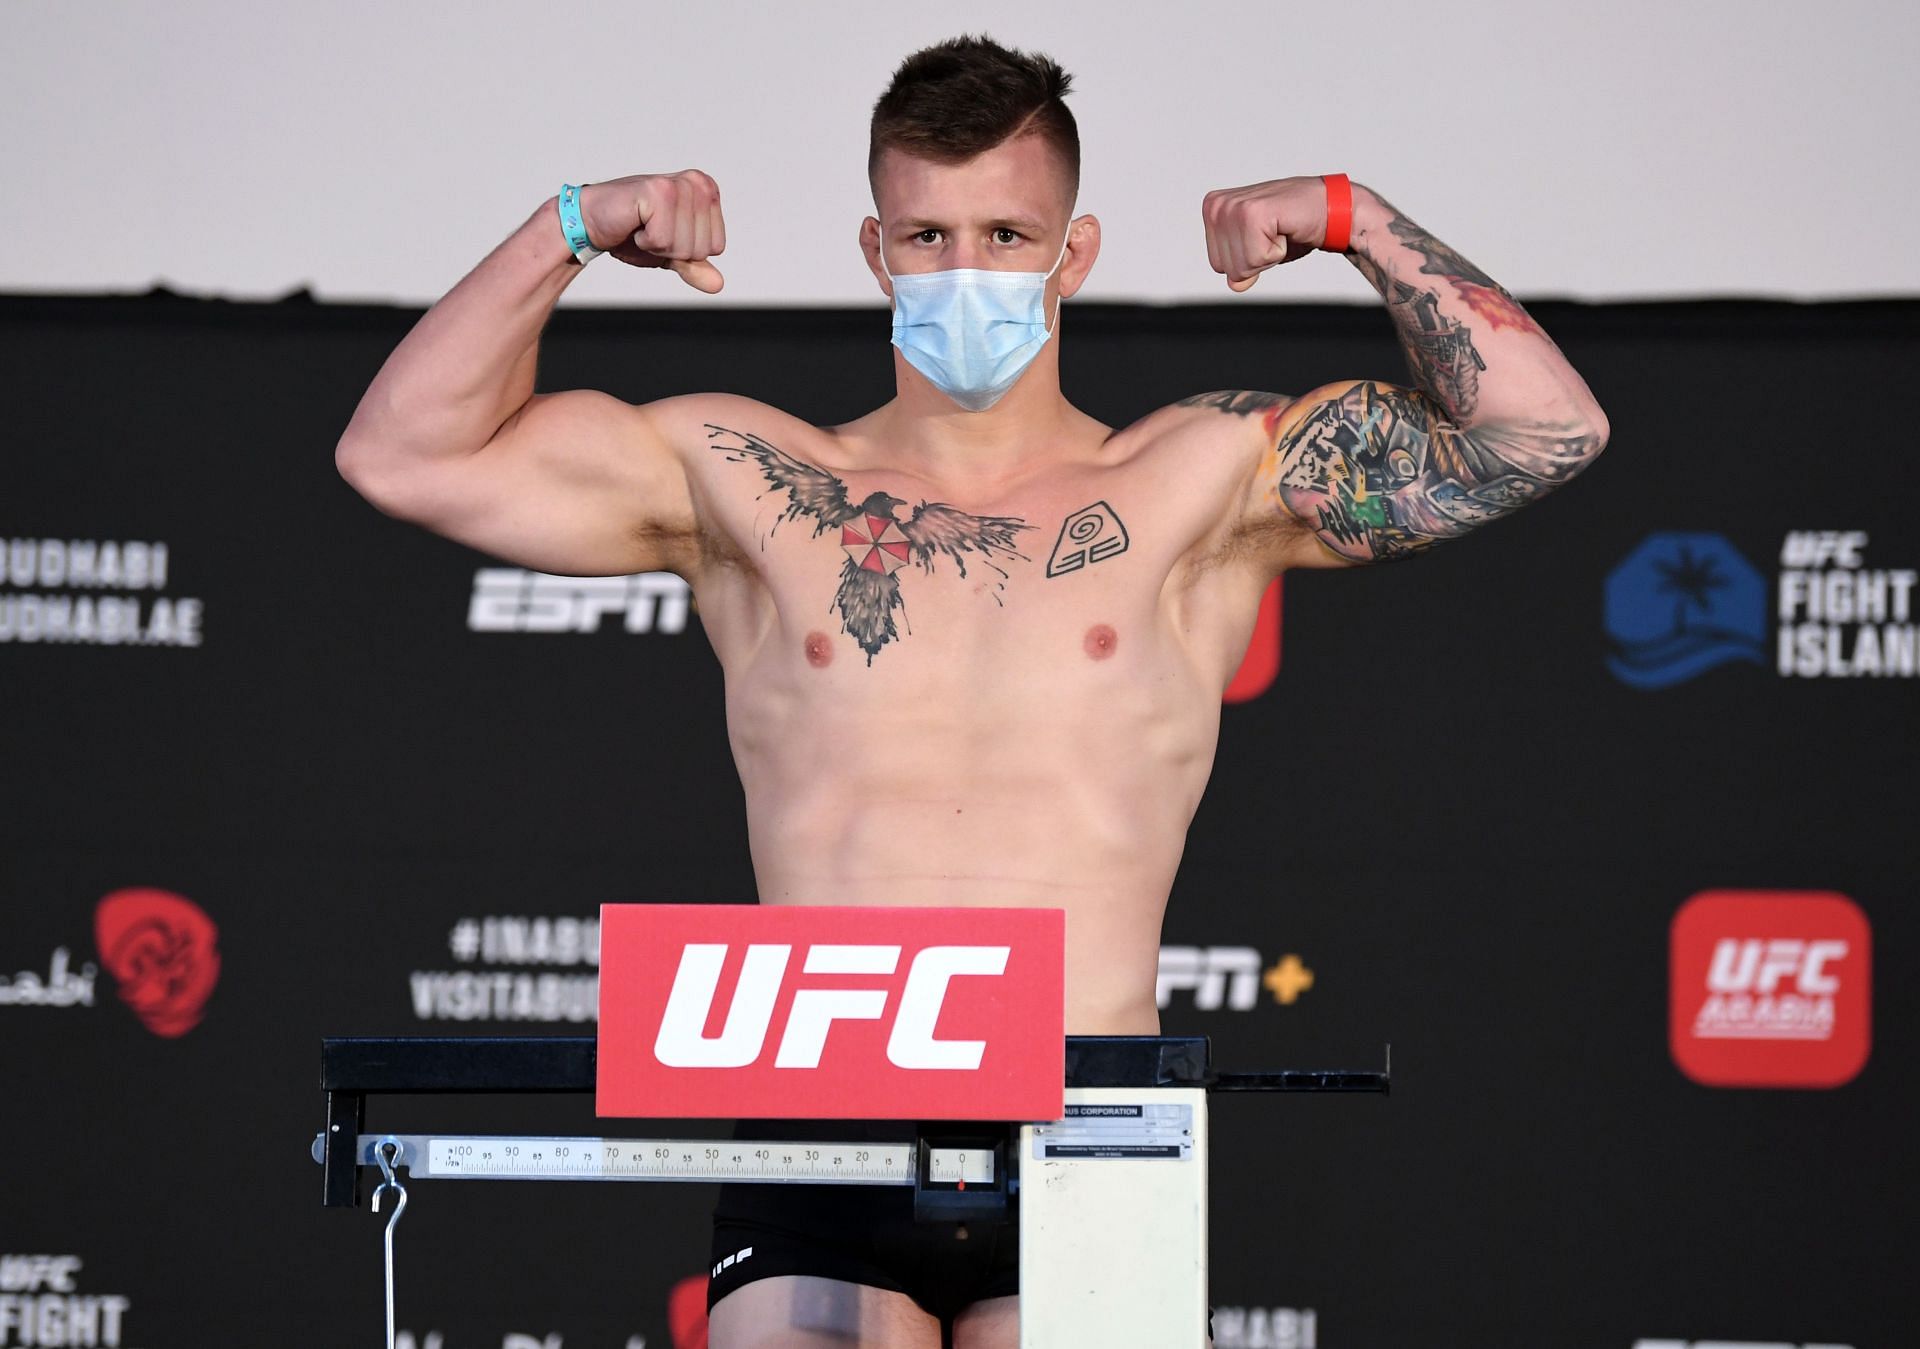 UFC Fight Night - Jimmy Crute weighing in